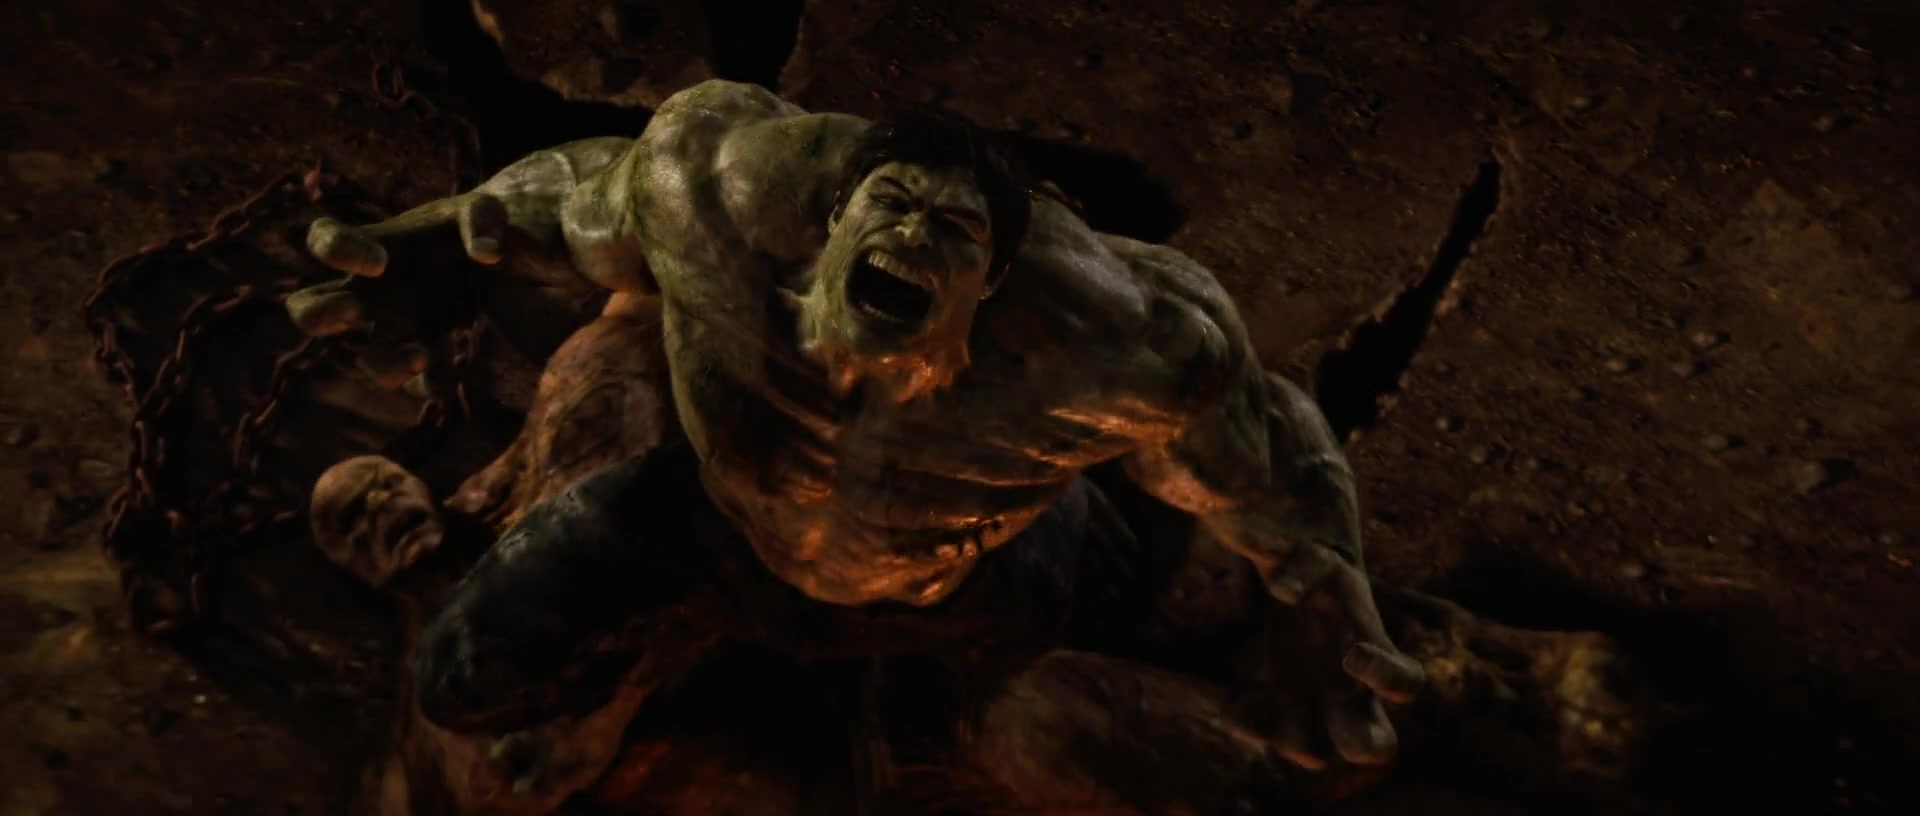 The Hulk (Edward Norton) stands triumphant over the Abomination (Tim Roth) in The Incredible Hulk (2009), Marvel Entertainment